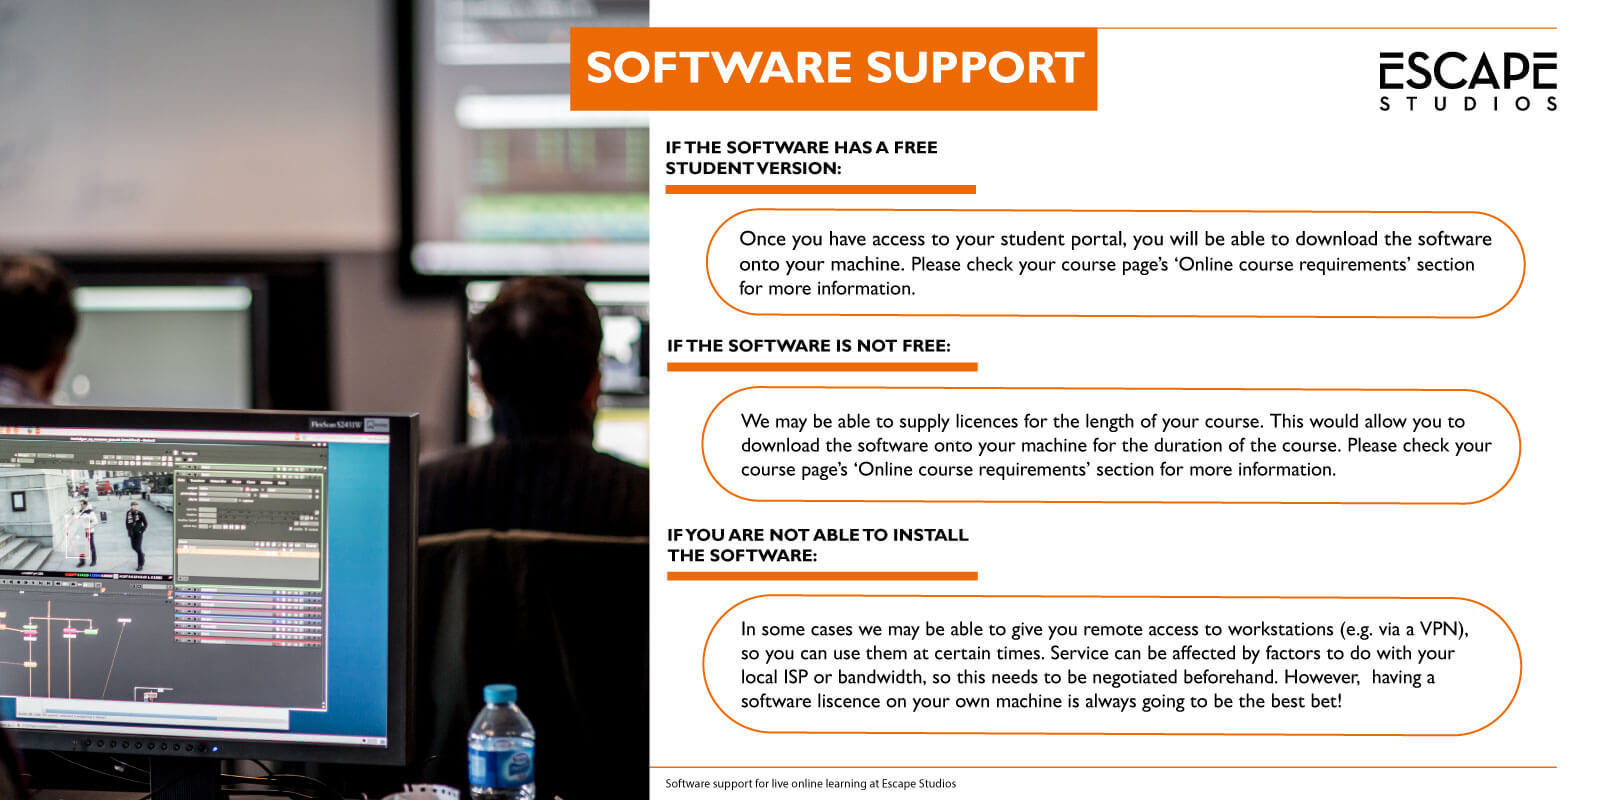 Software support flier from Escape Studios